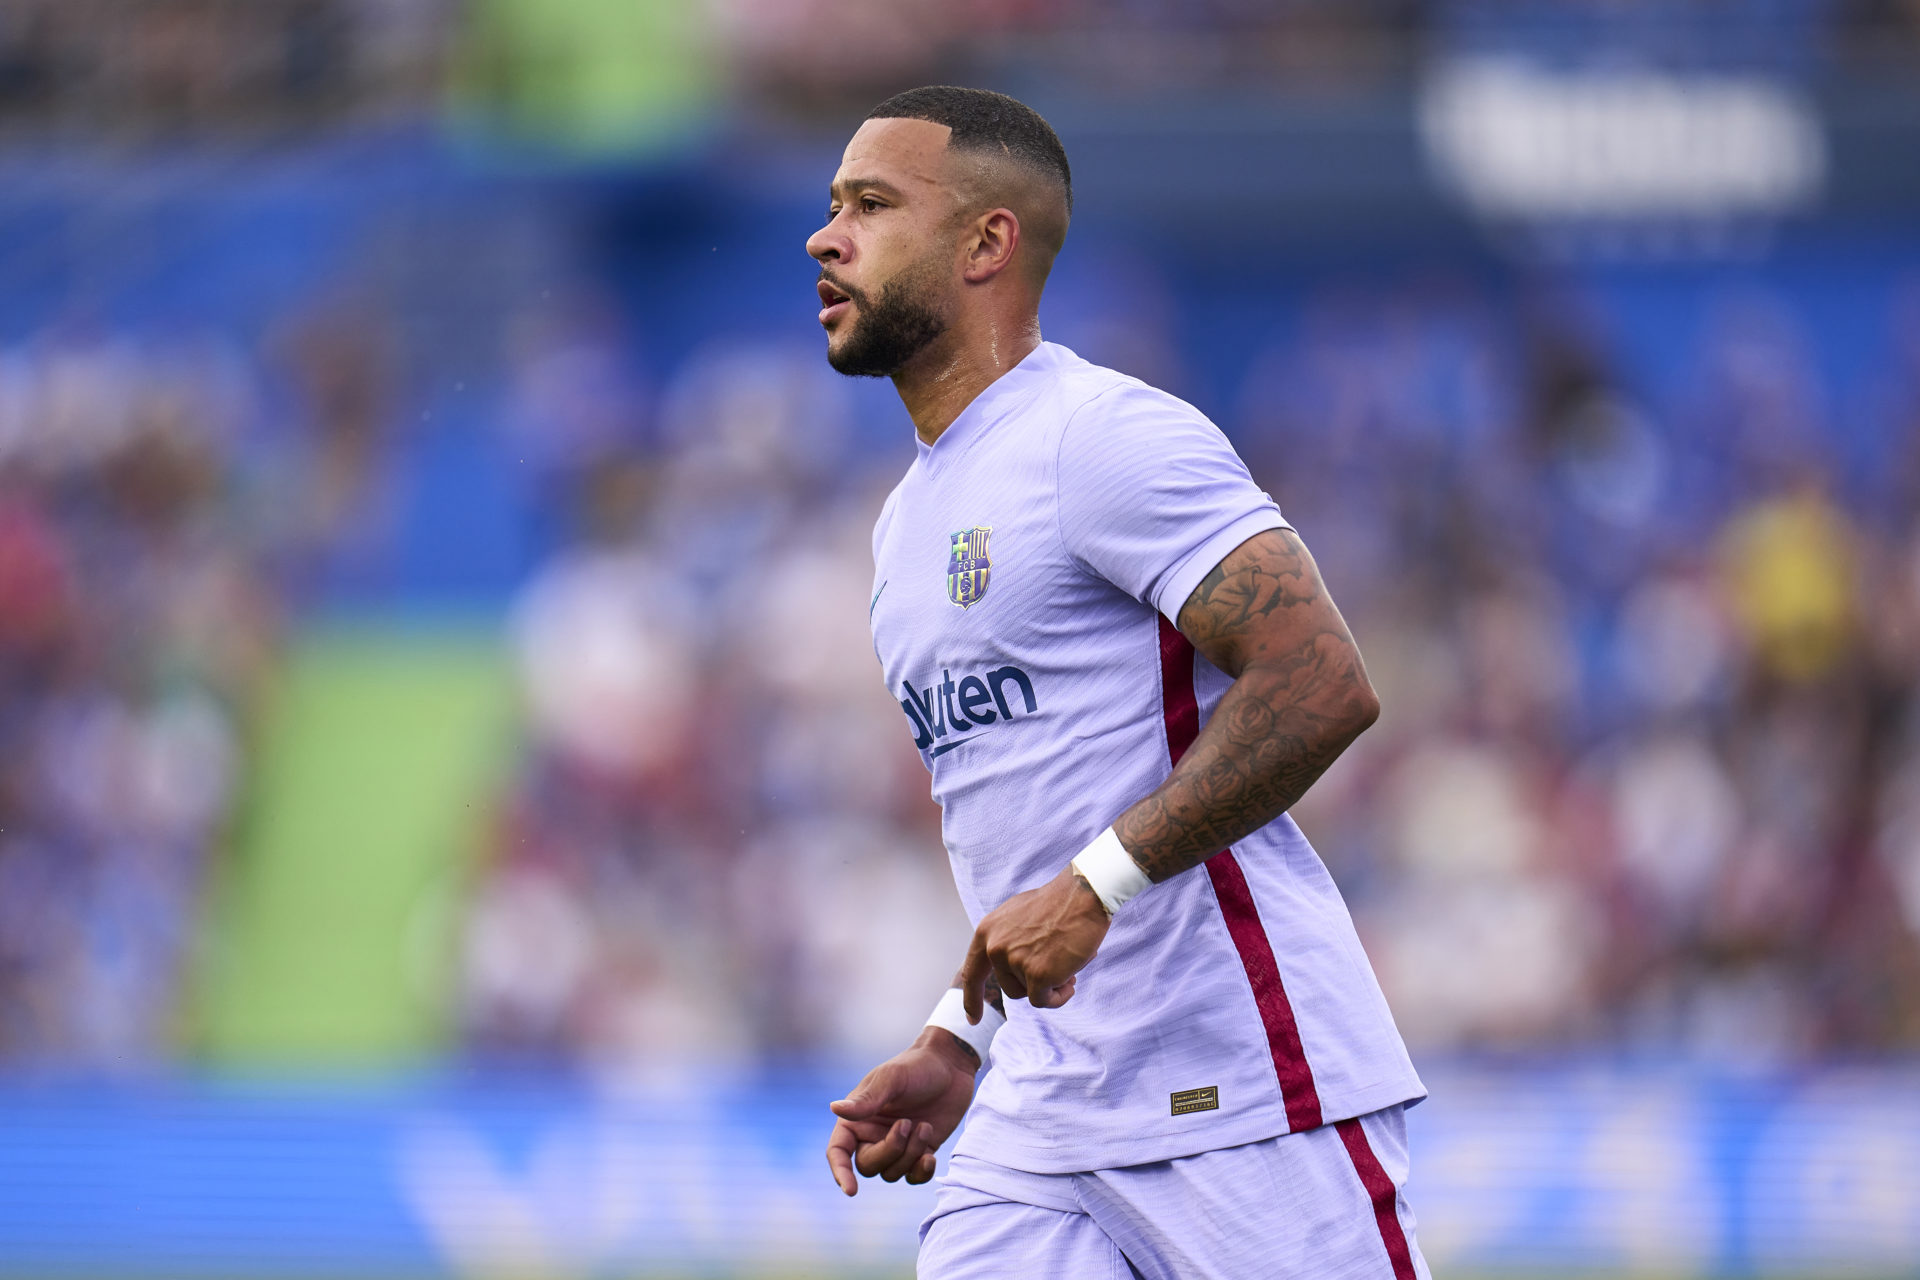 West Ham told to pay £17 million to sign Barcelona ace Memphis Depay